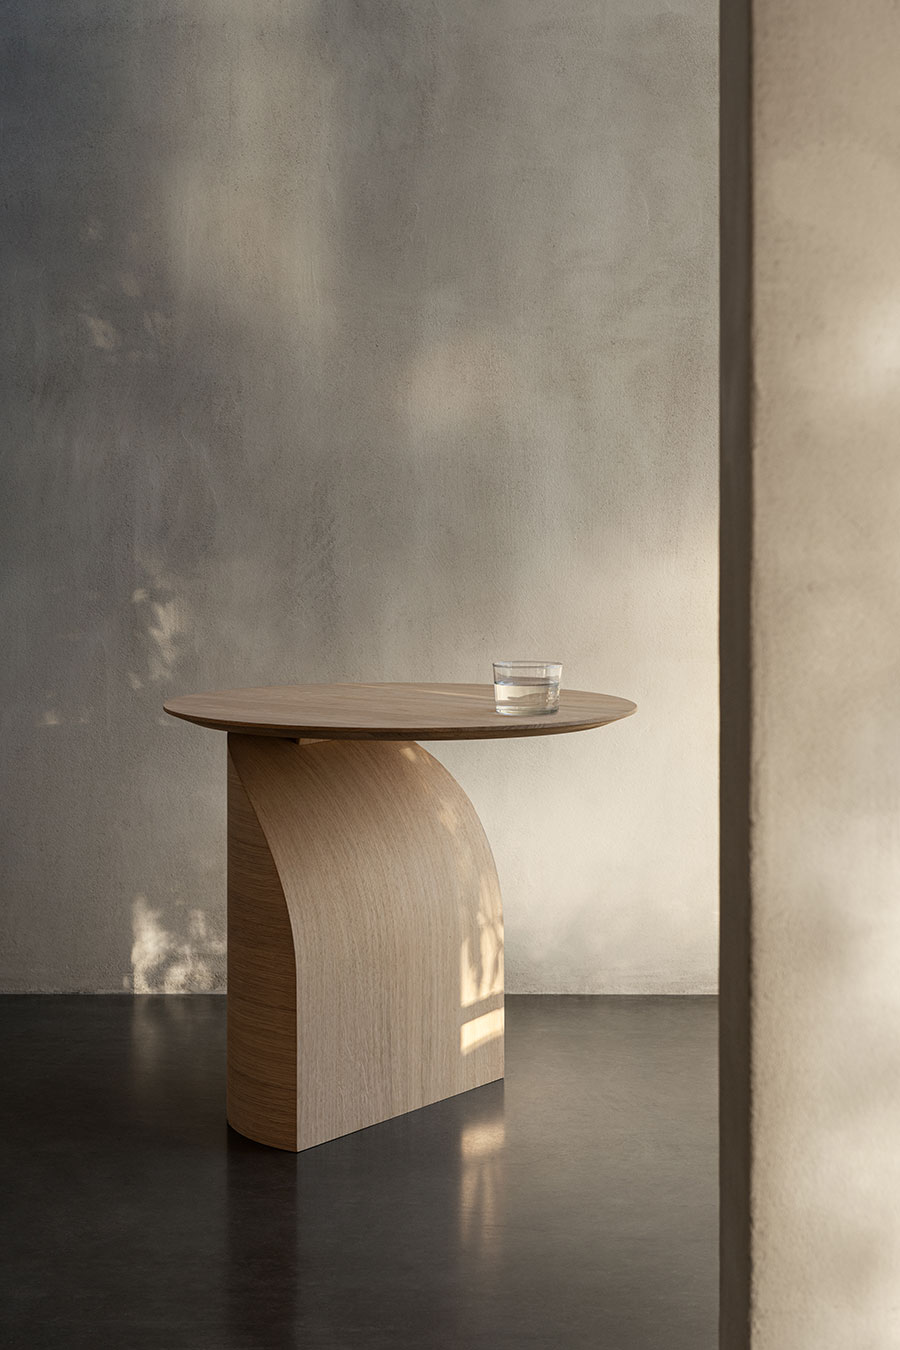 The Savoa table by Sakari Hartikainen combines simplicity and a sense of lightness with advanced technology.